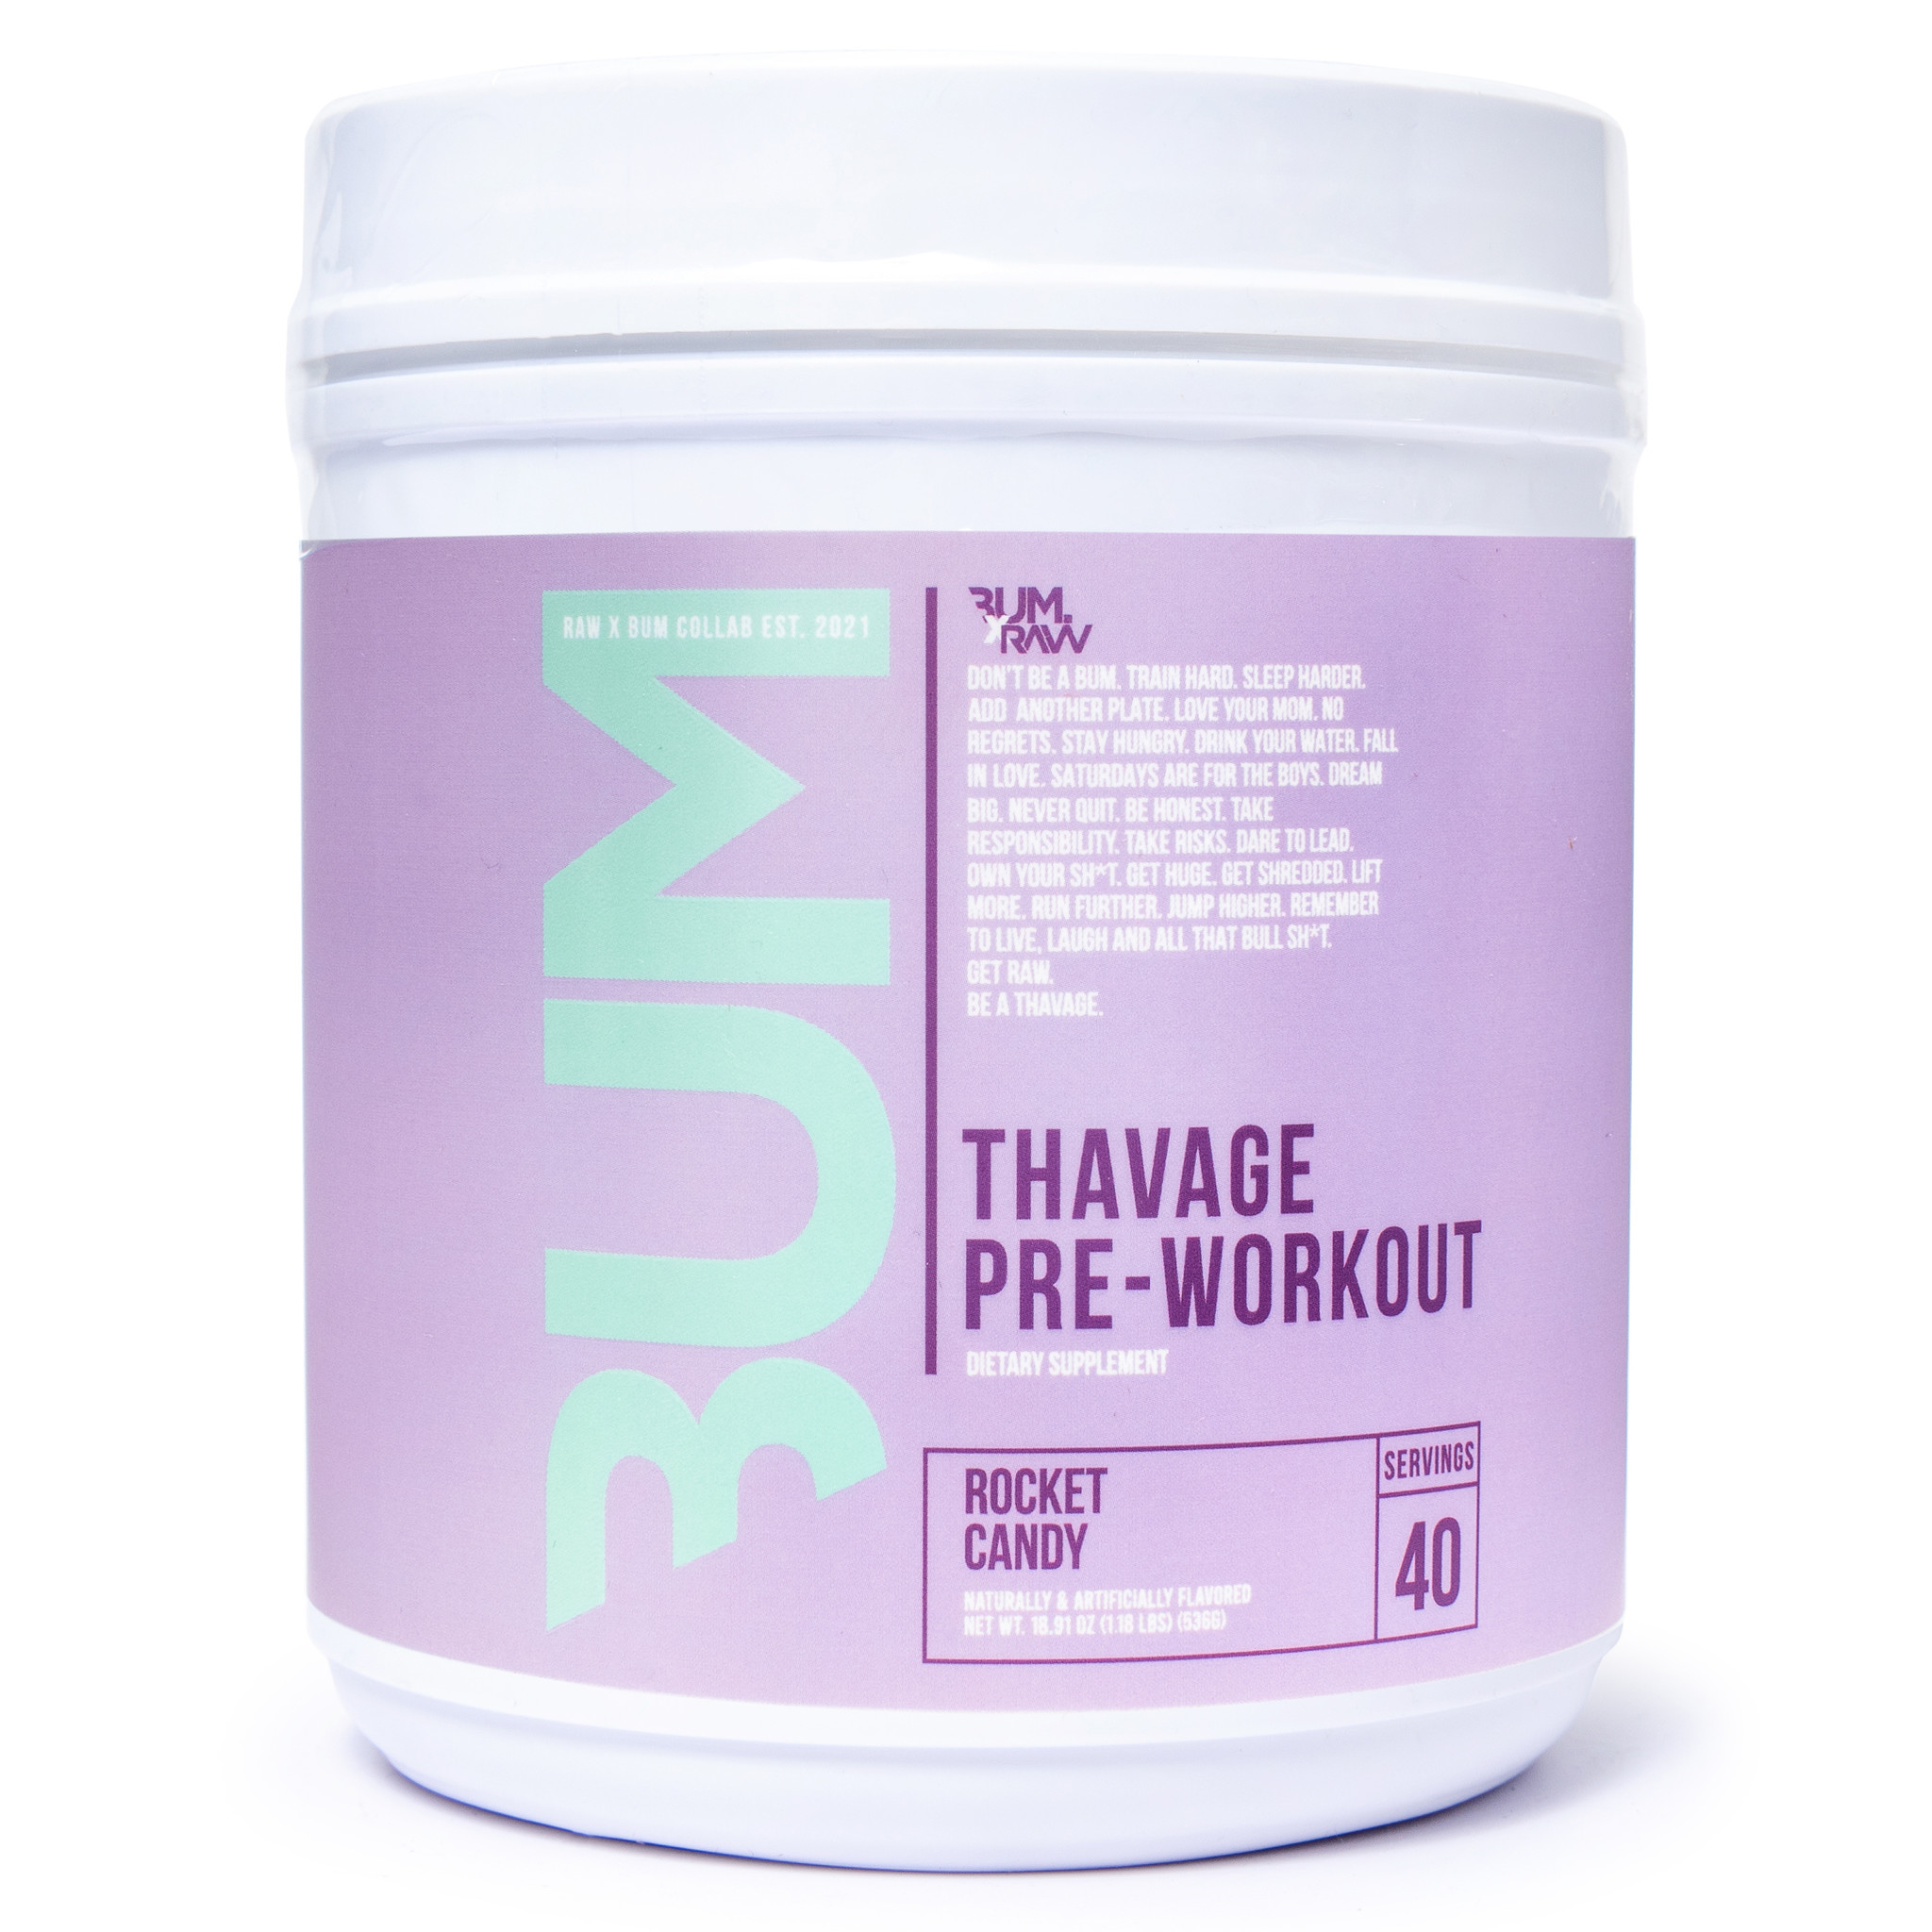 CBUM Thavage Pre-Workout by Raw Nutrition